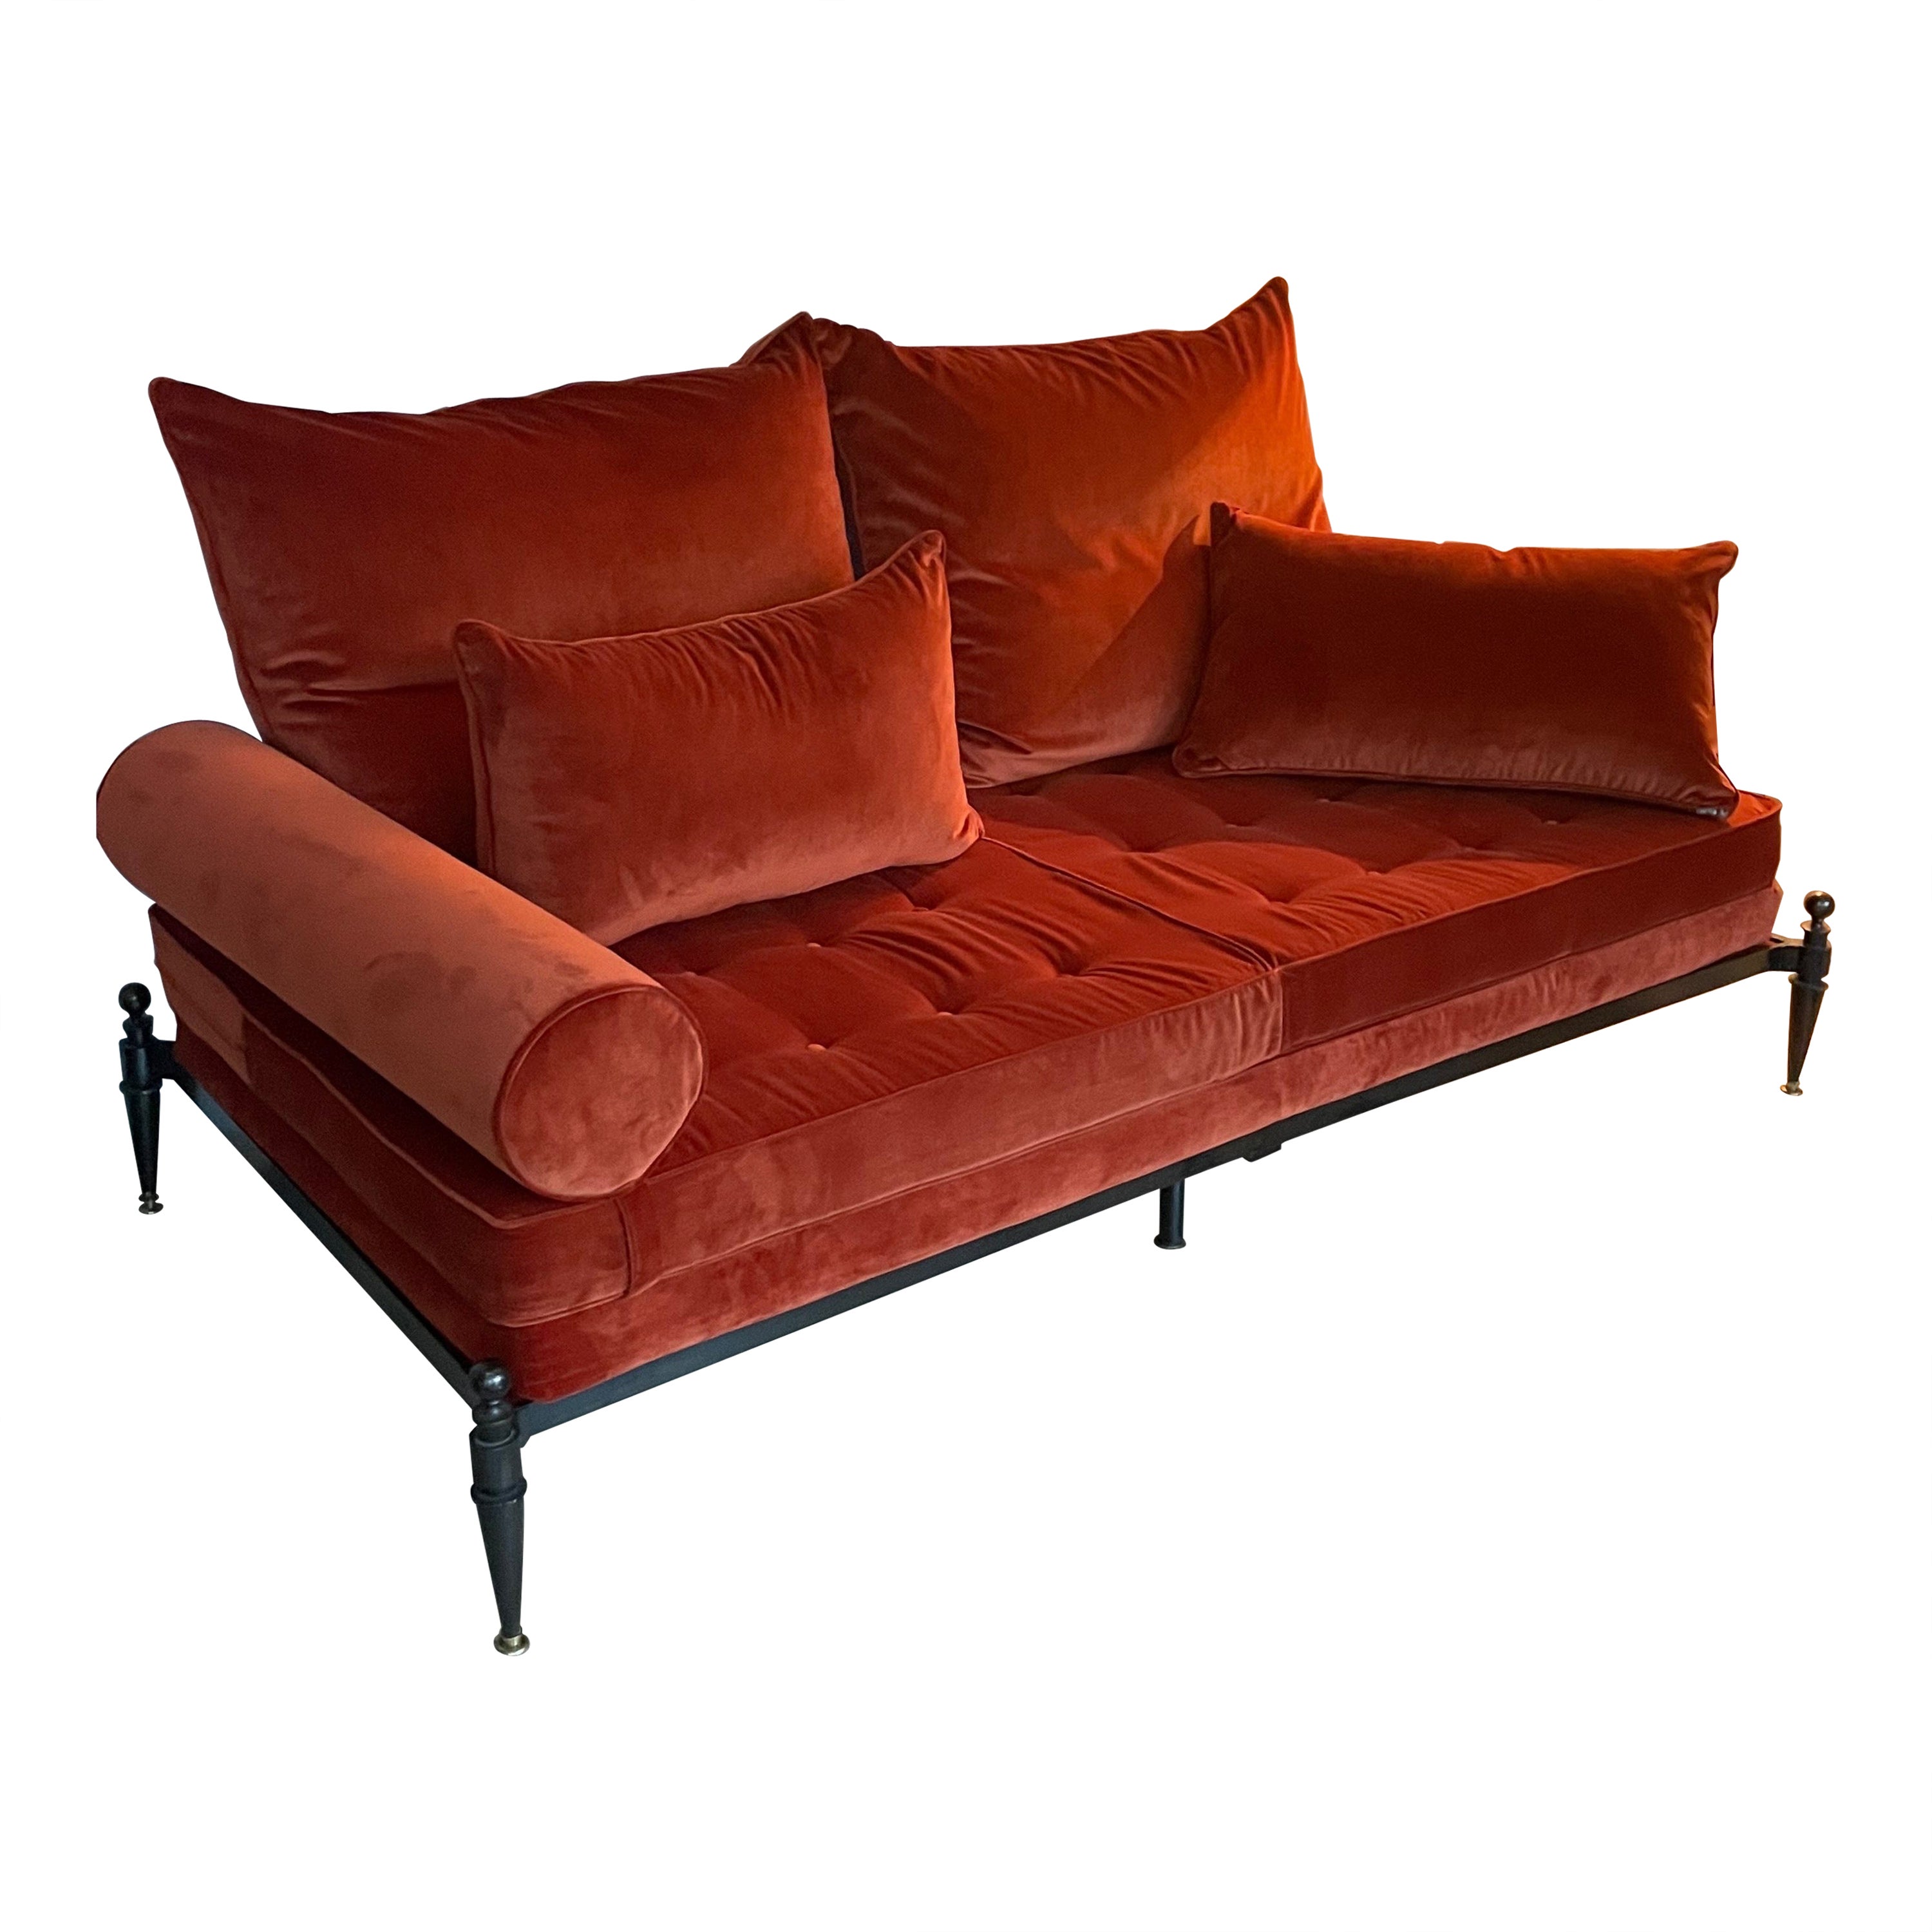 Elegant Neoclassical Bronze and Velvet Sofa by Jacques Quinet, France 1948. For Sale